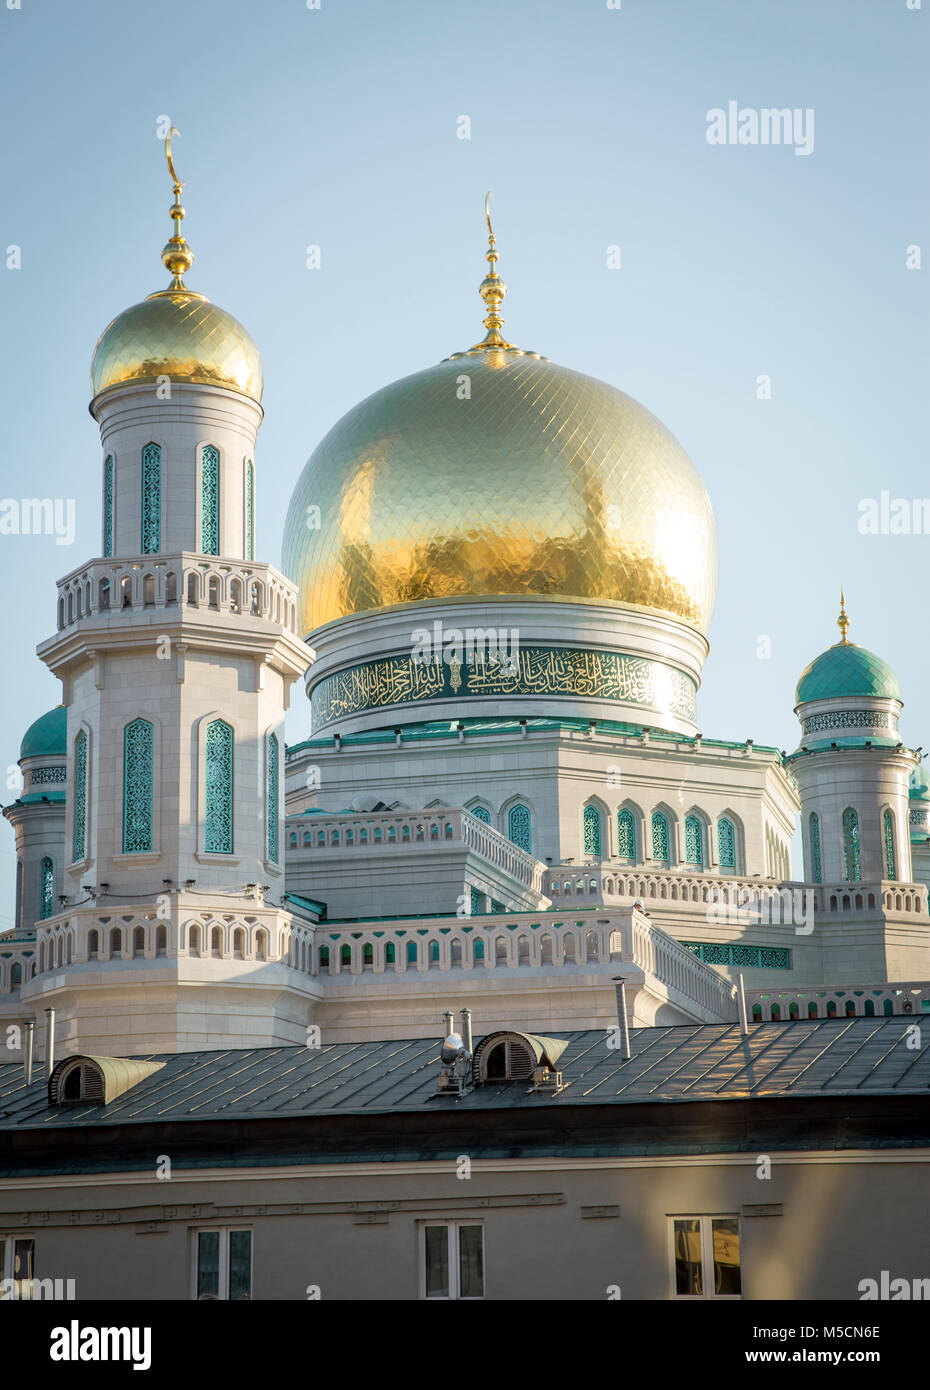 The largest and highest mosque in Europe - Moscow city, Russia Stock Photo